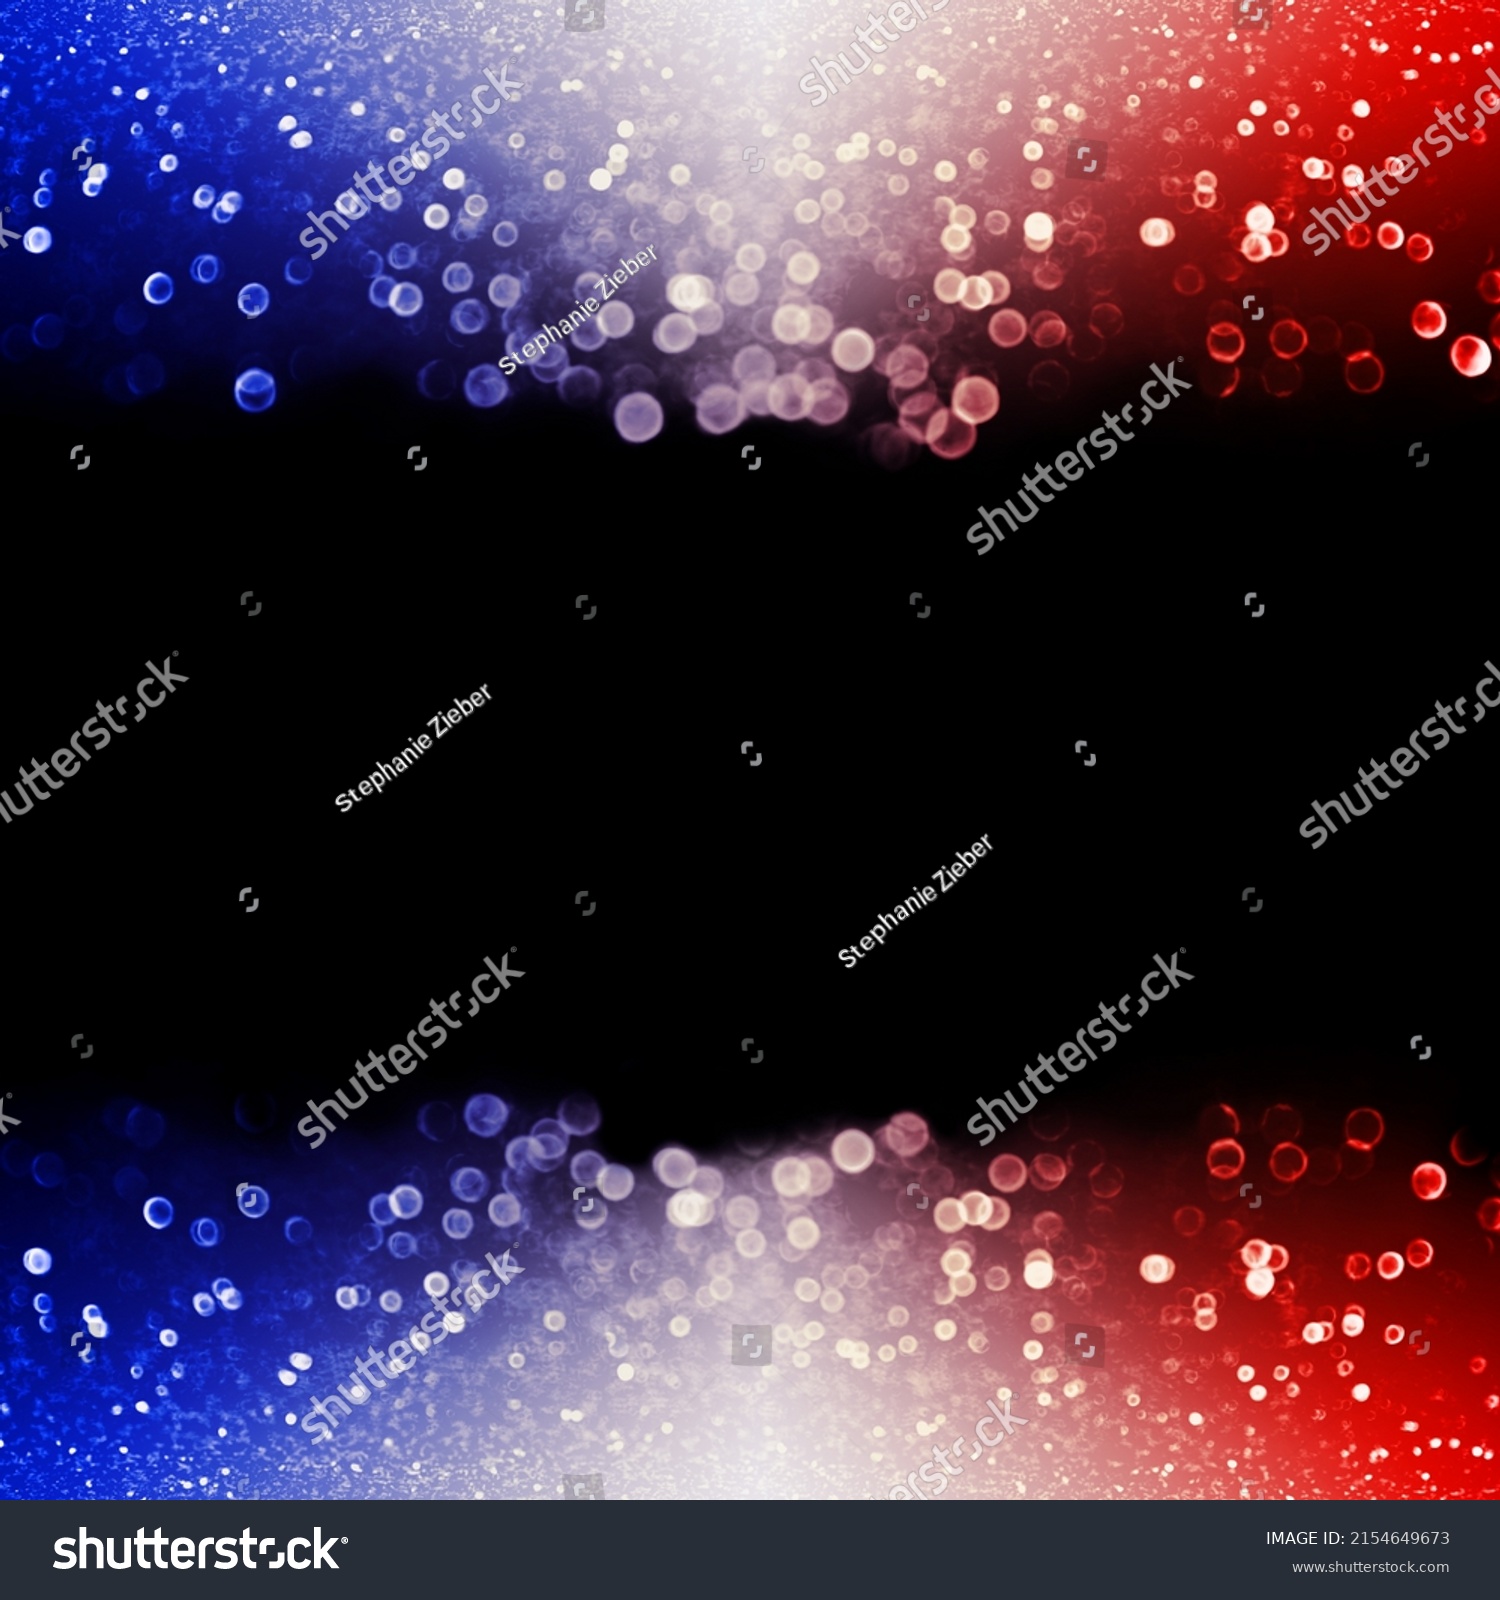 Abstract patriotic red white and blue glitter sparkle confetti black background for party invite, July 4th 14 firework, memorial flag pattern, USA fourth 4 sale, election president vote or labor day #2154649673